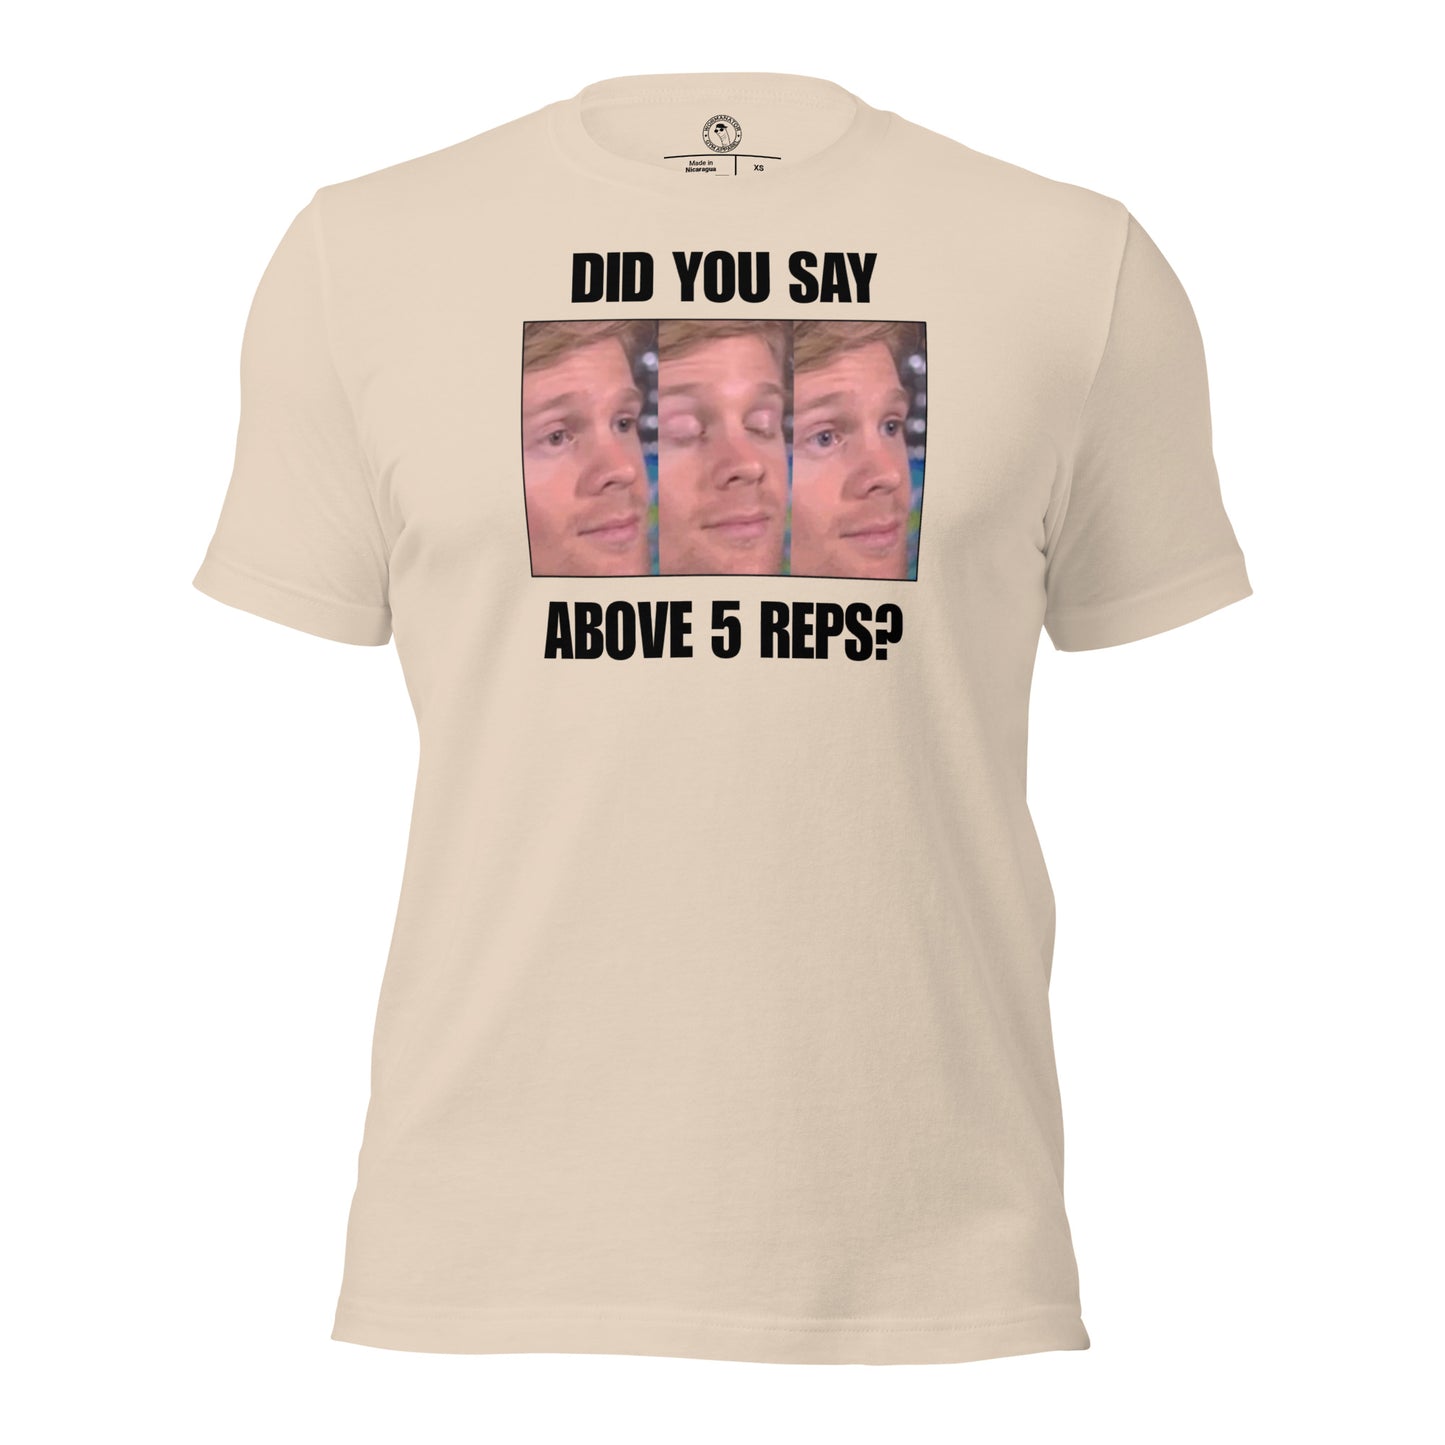 Above 5 Reps is Cardio Shirt in Soft Cream